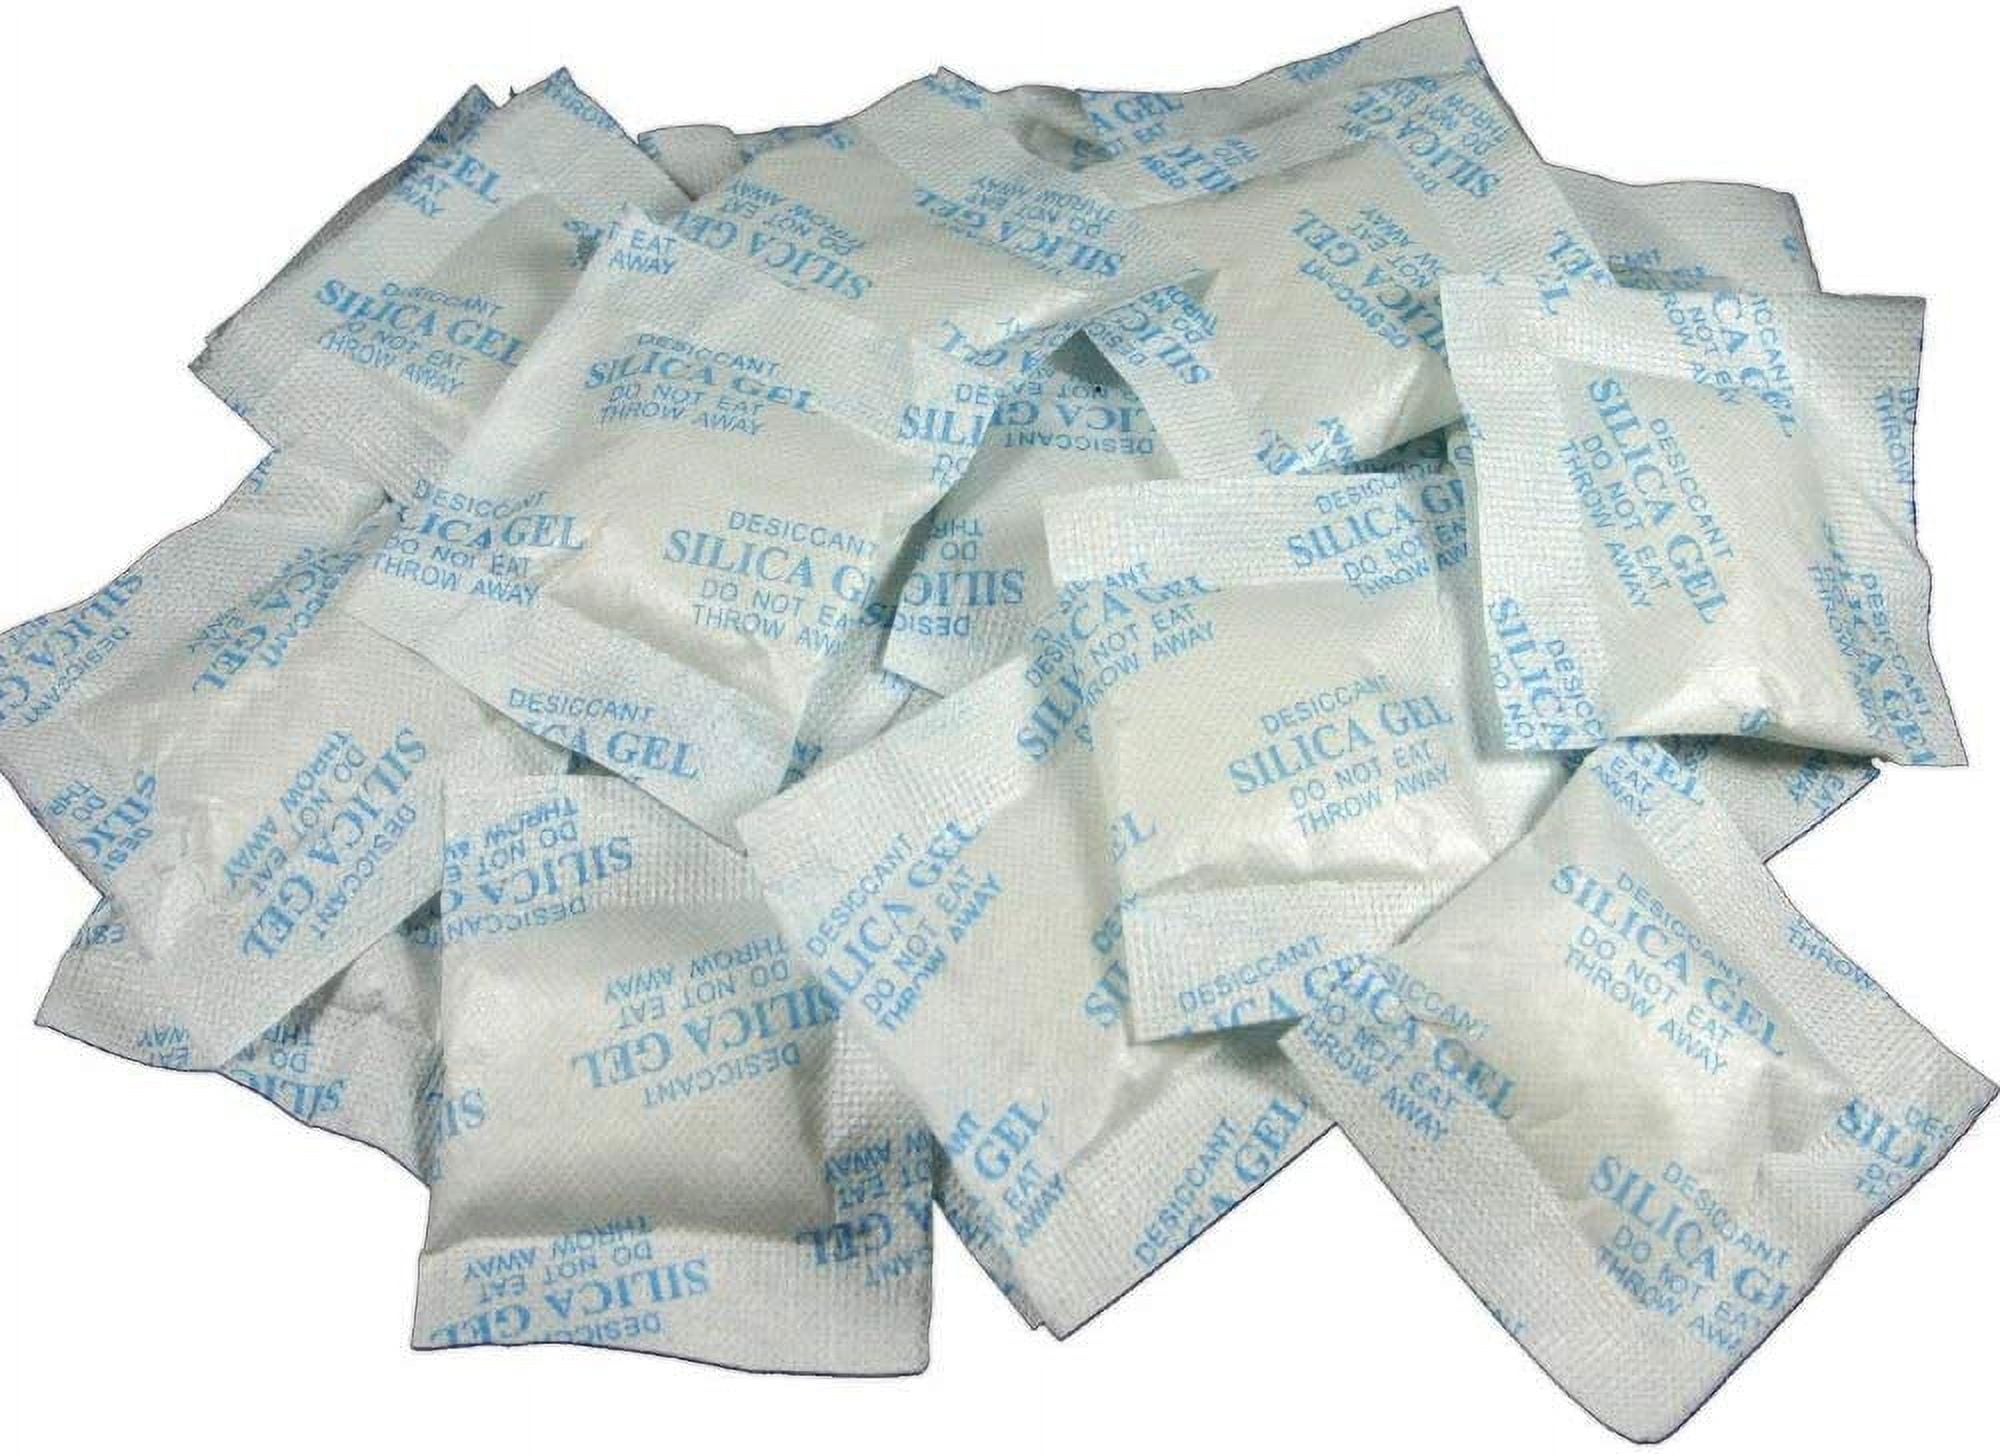 60 Packs 3g Grams Silica Gel Desiccant Packets Moisture Absorber Drying  Bags